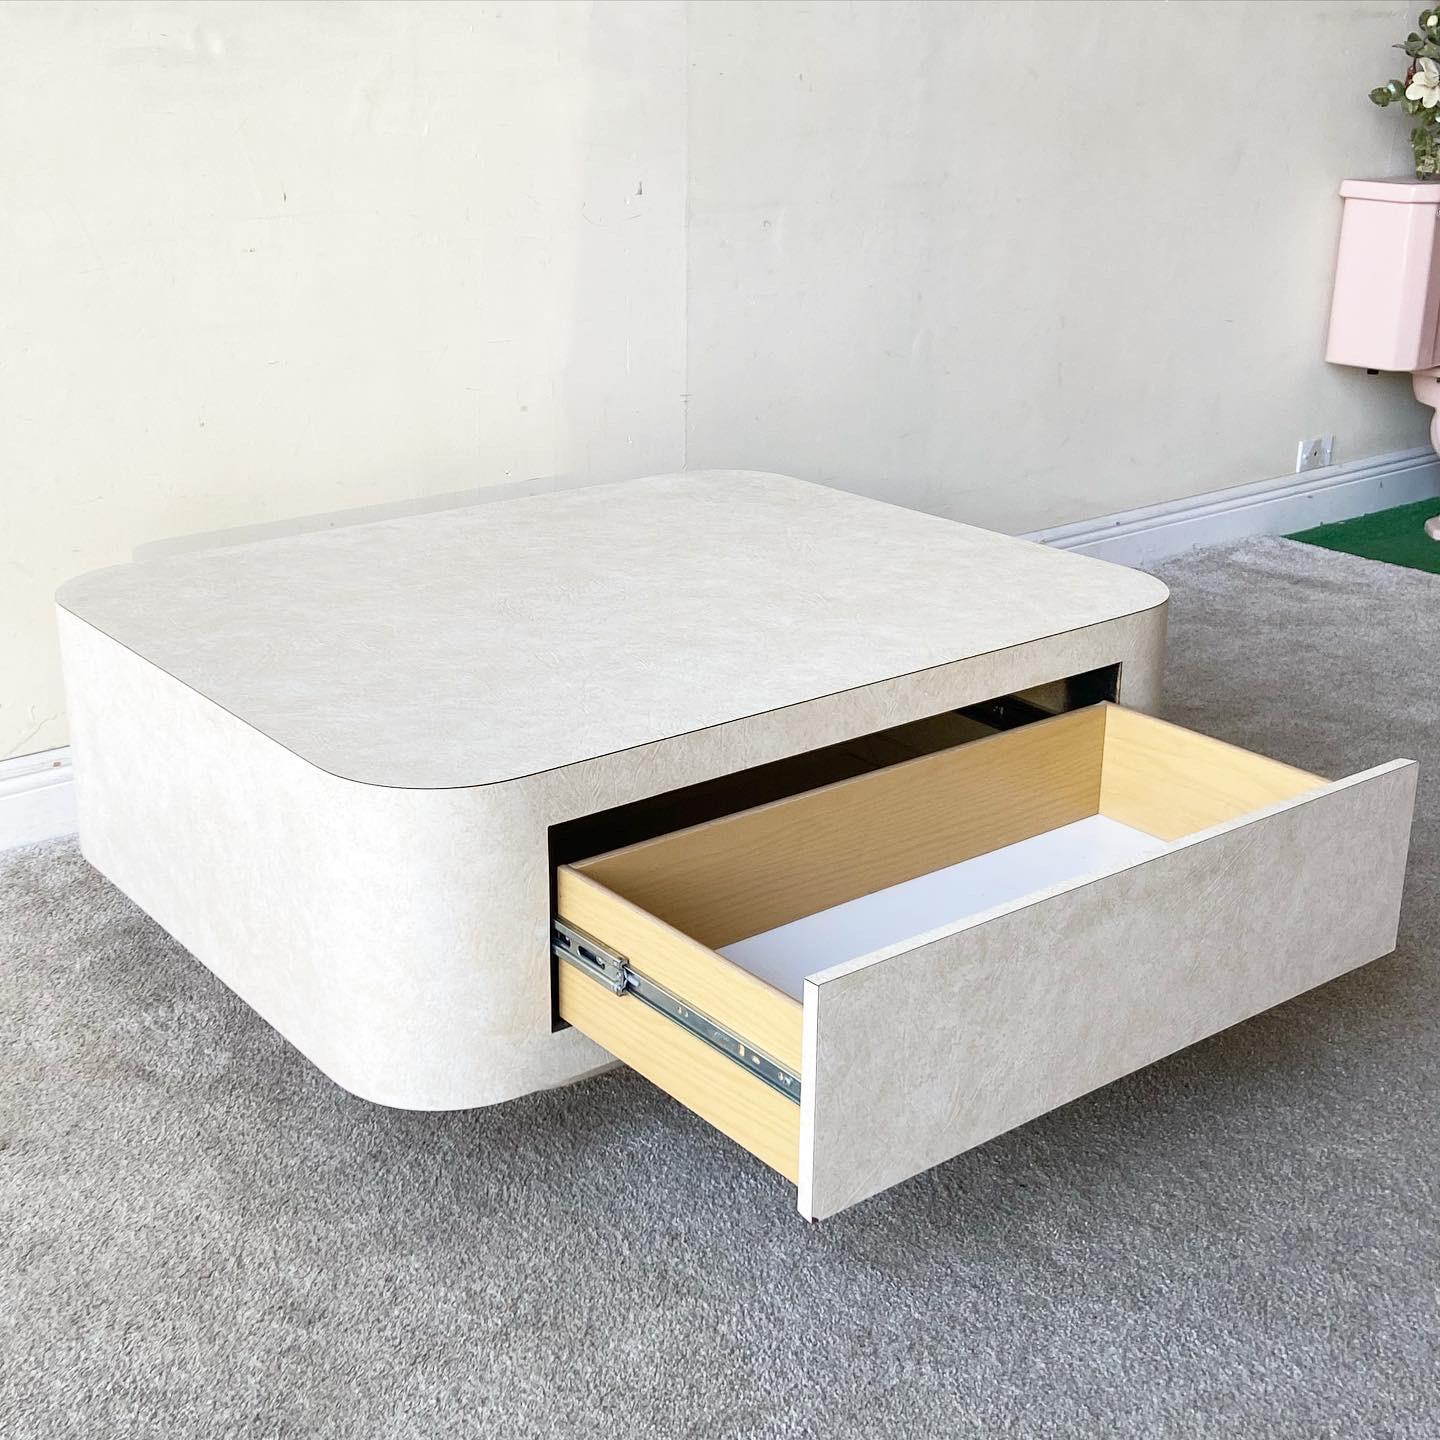 Incredible postmodern square coffee table with two spacious drawers. The table features a faux goat skin vinyl laminate giving it a unique surface texture.

Additional Information:
Material: Vinyl, Wood
Color: Cream
Style: Postmodern
Time Period: